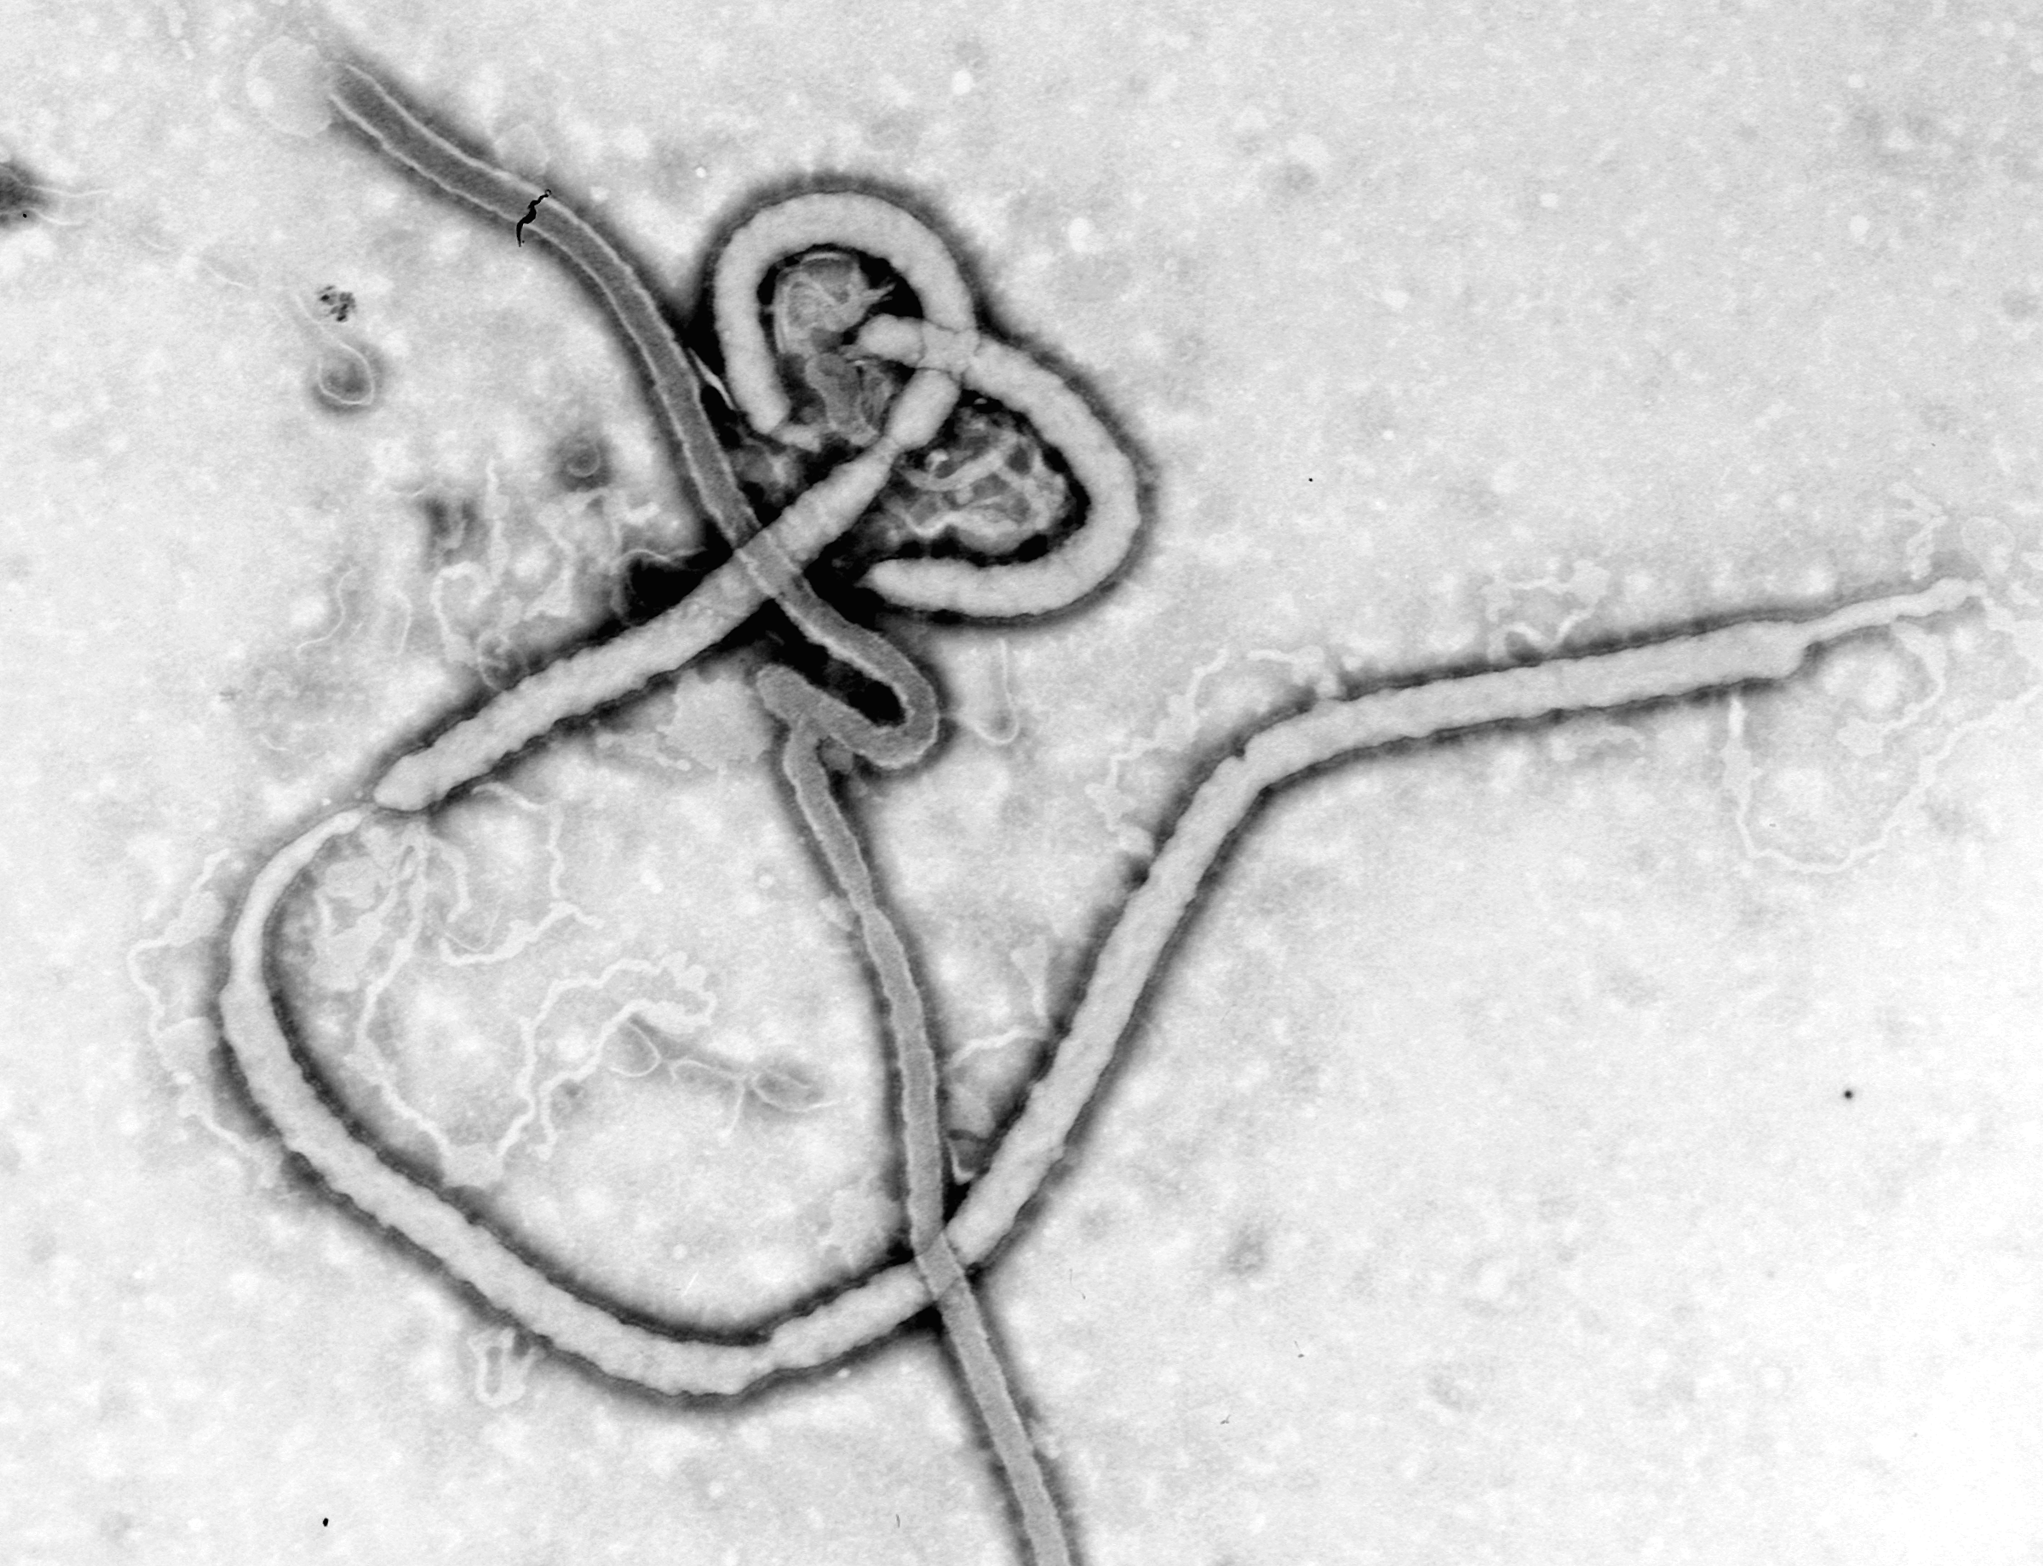 Why You Shouldn't Be Afraid of Ebola in the US - Center for Disease Dynamics, Economics & Policy (CDDEP)